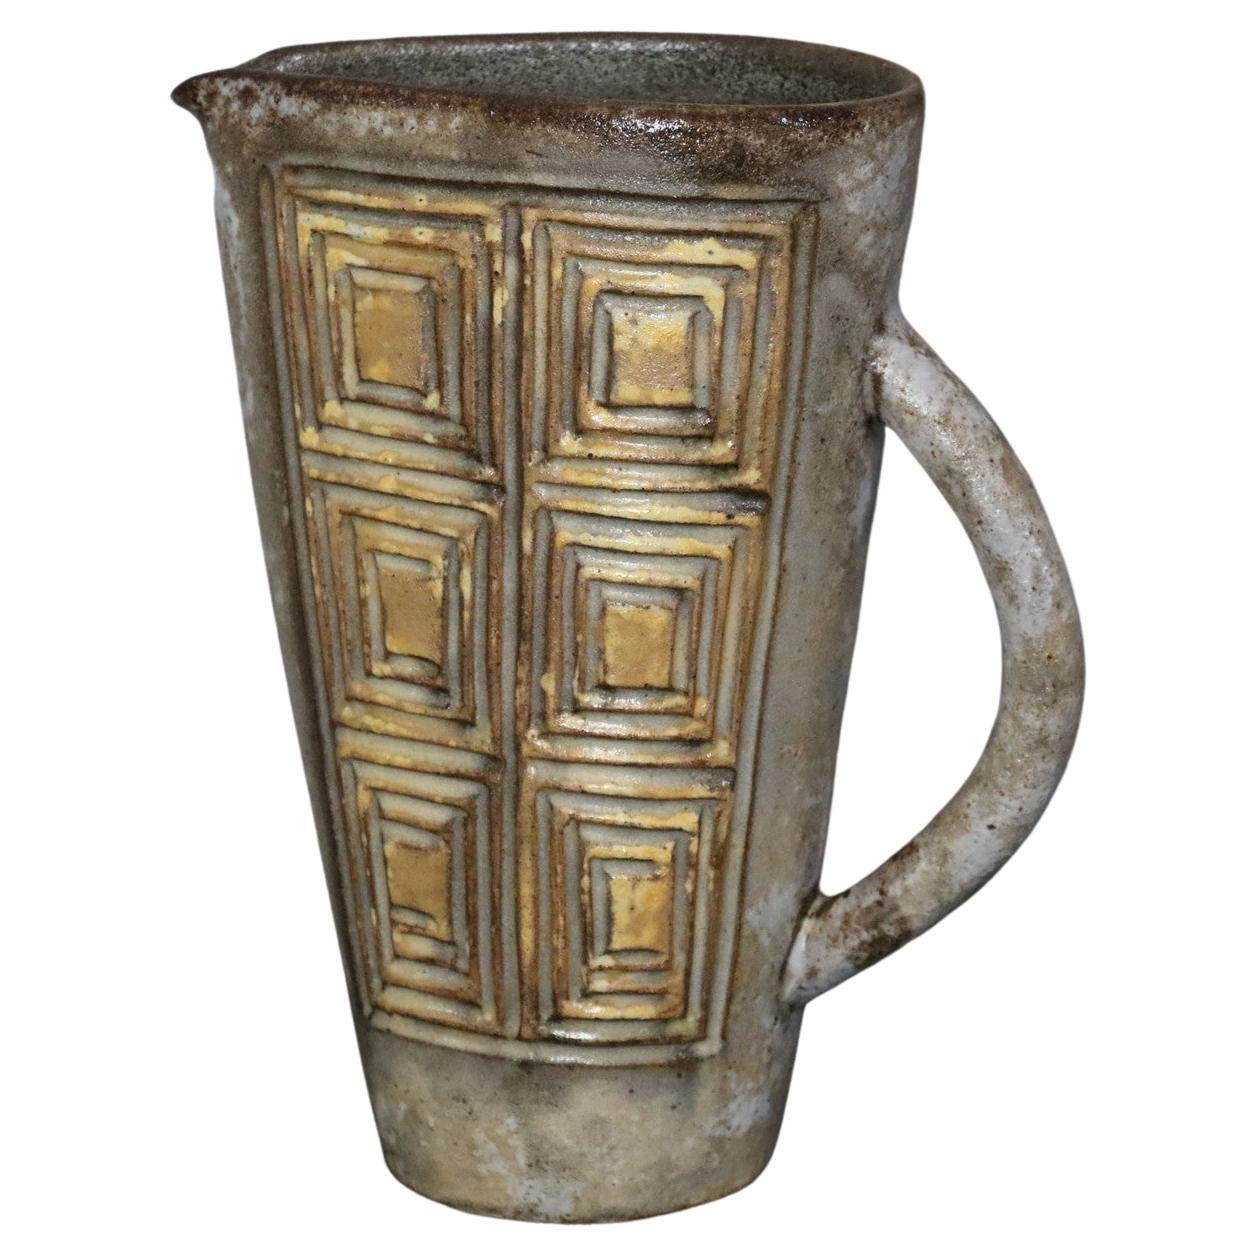 Kostanda - French Ceramic Pitcher, circa 1970s, Vallauris era Derval, Capron

It is in a perfect condition. Please be sure to look at the pictures, they complete the description of the piece.
The pitcher is signed under the base.

Alexandre